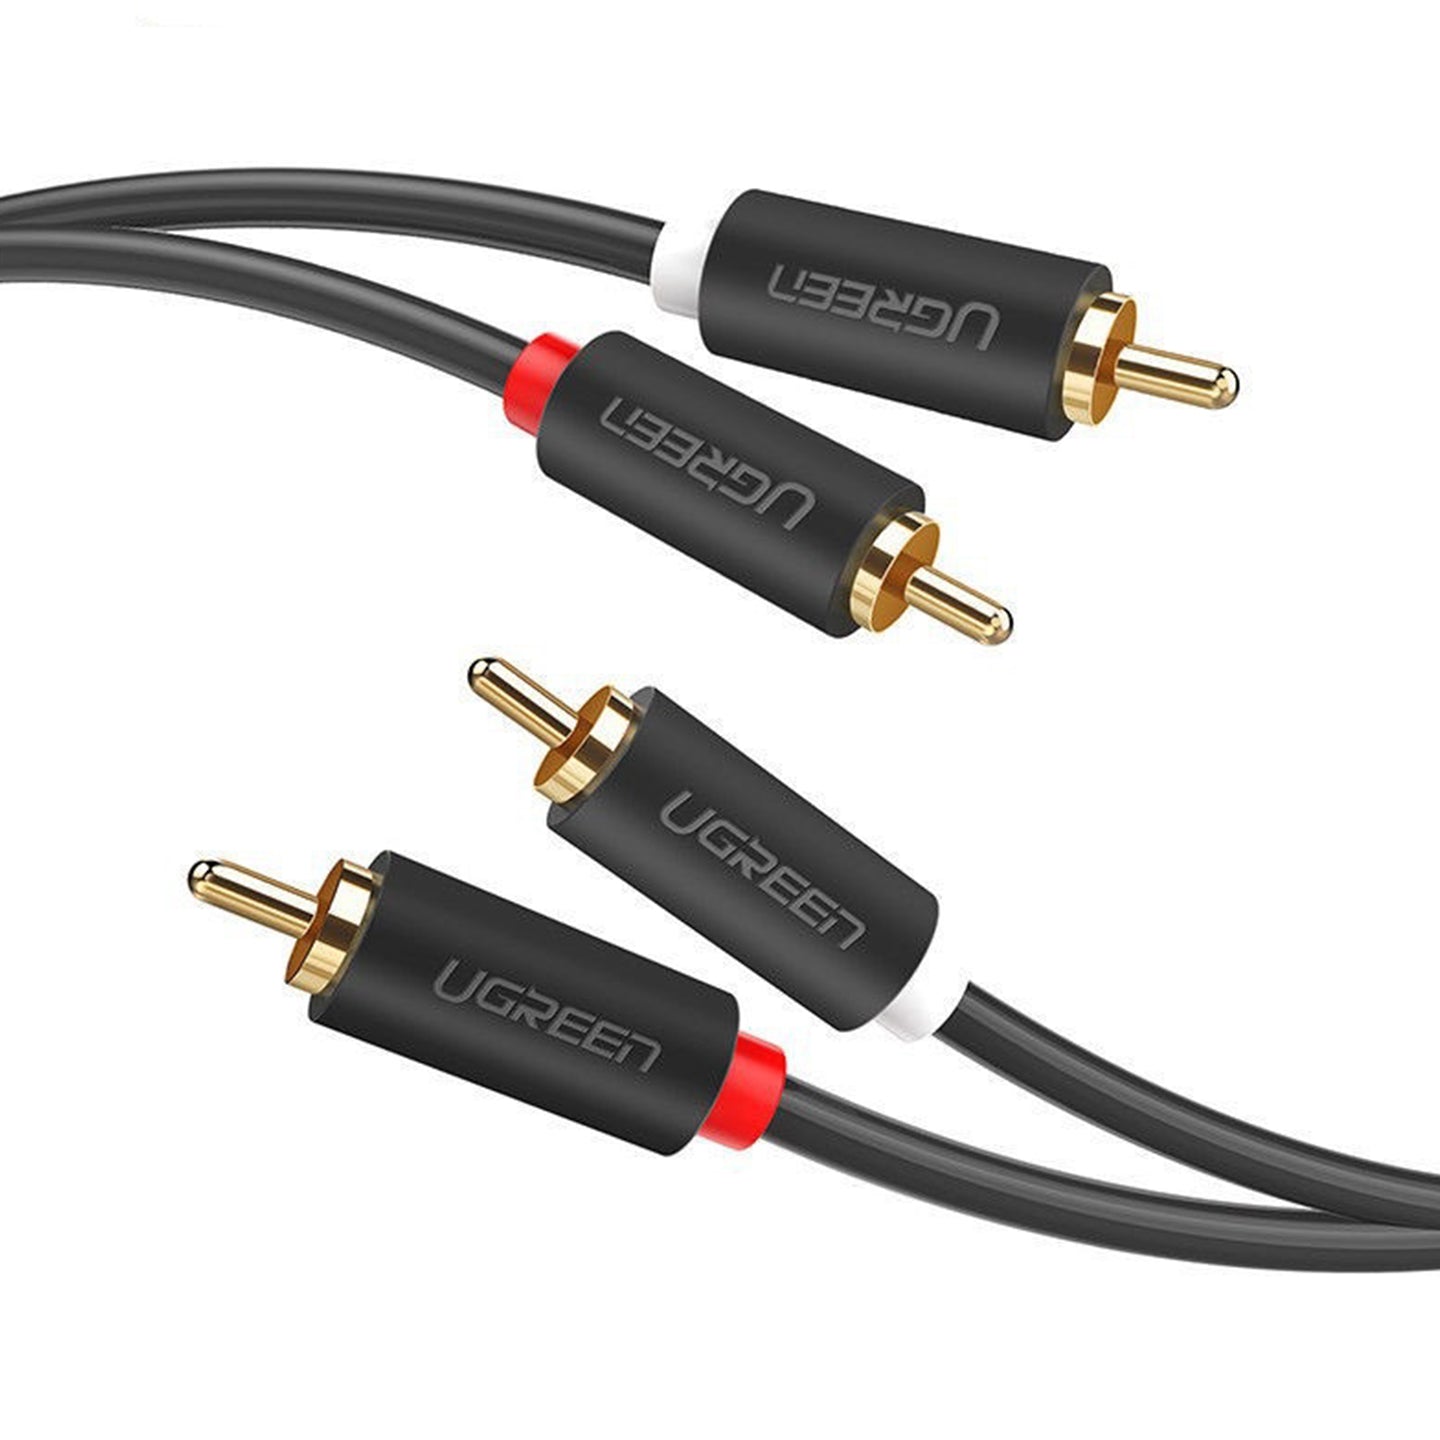 UGREEN 2 RCA Male to Male Stereo Audio Jack Gold-Plated Cable for Audio, Amplifier, TV, DVD Devices (1M, 1.5M 2M, 3M, 5M) - Black | 30747 10517 10518 10519 10520